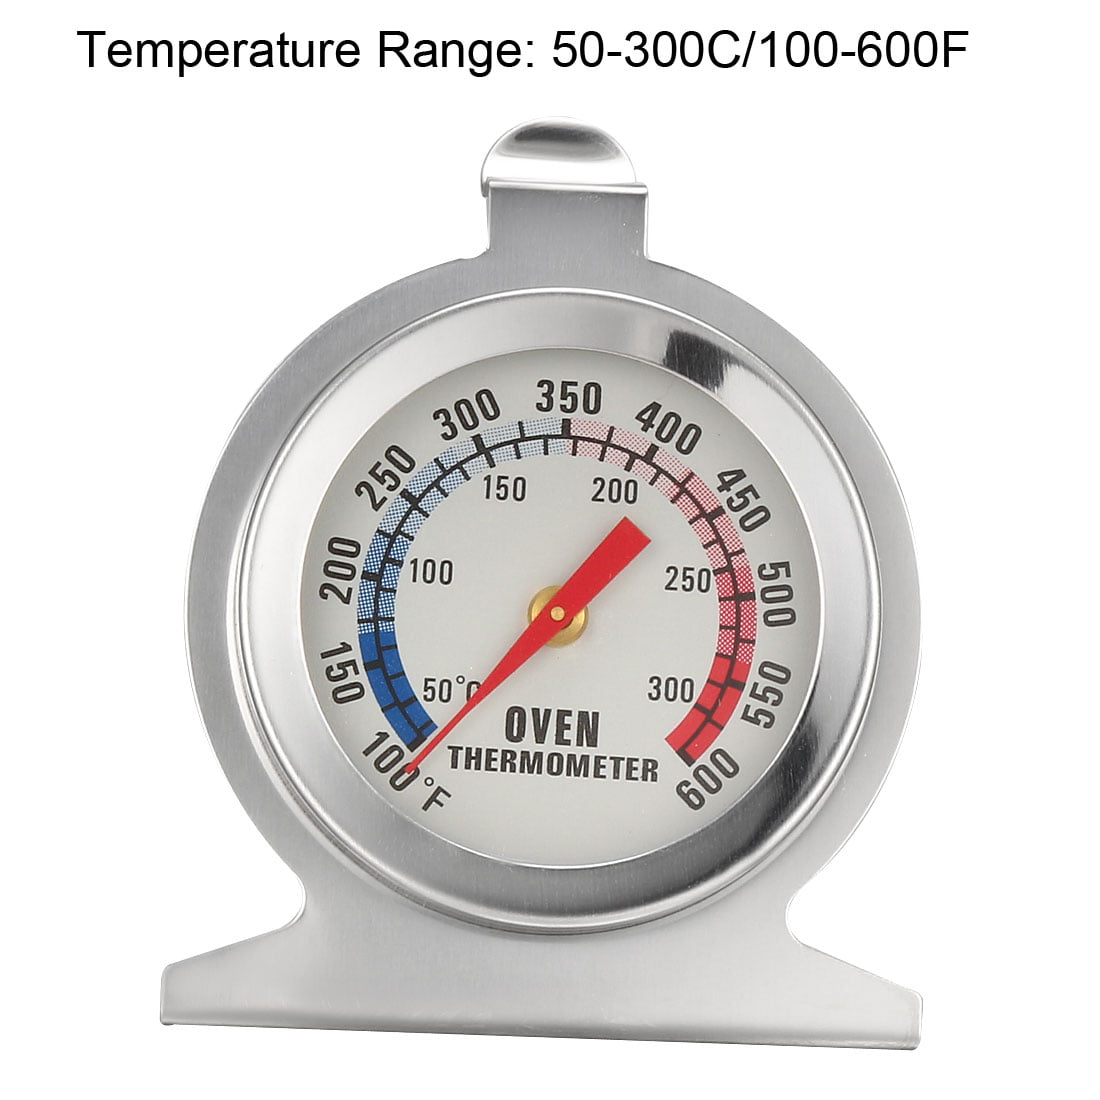 100% Genuine! ACURITE Gourmet Stainless Steel Oven Thermometer!